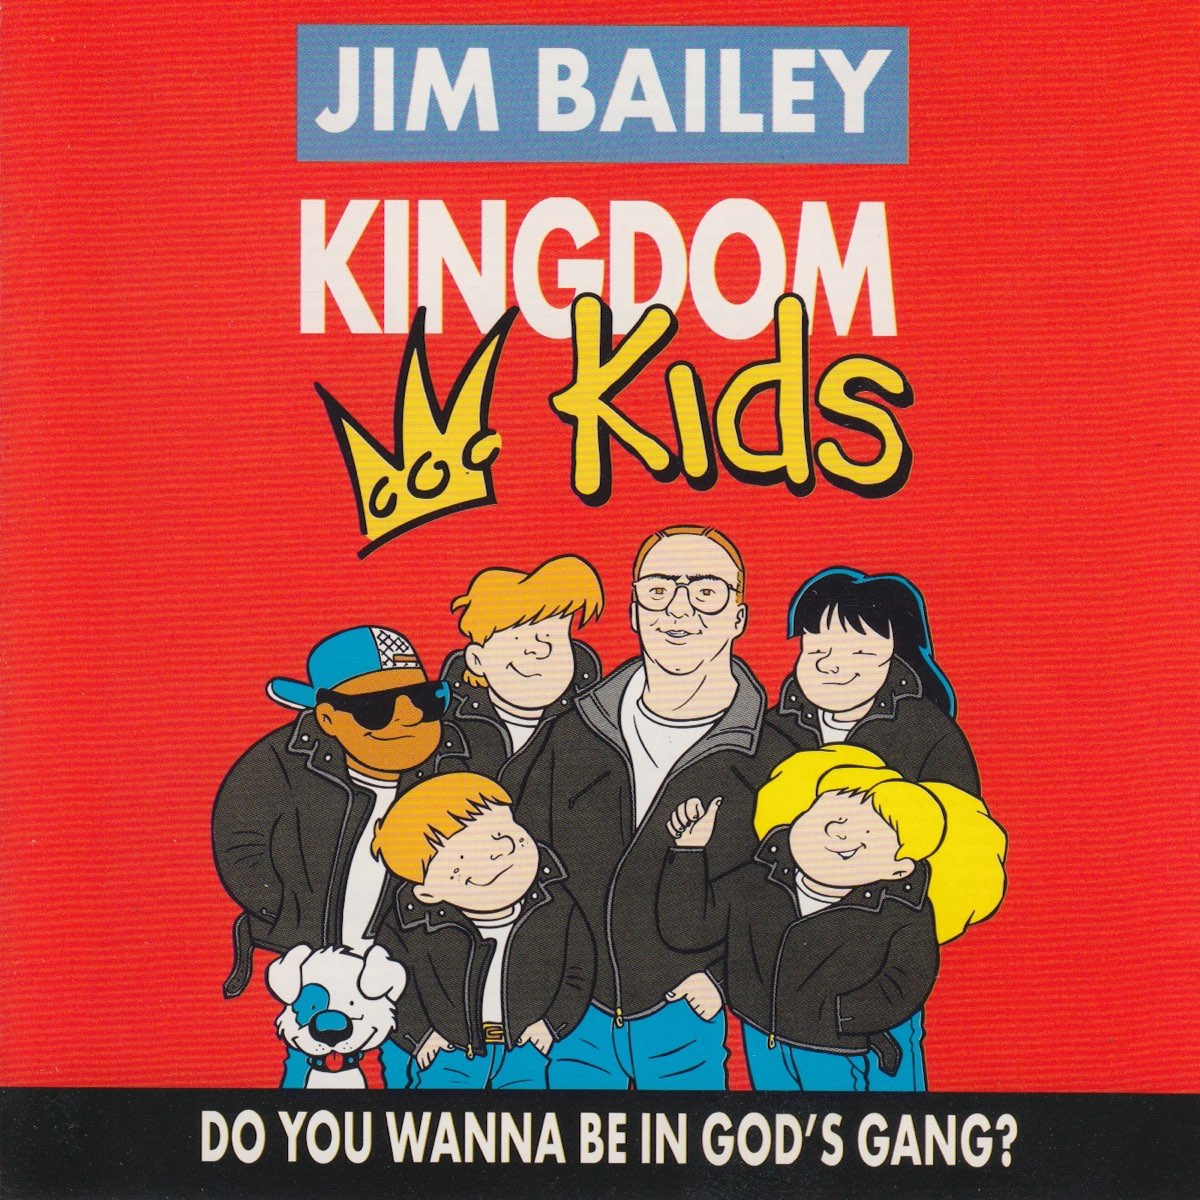 ‎Kingdom Kids - Do You Wanna Be In God's Gang? by Jim Bailey on Apple Music